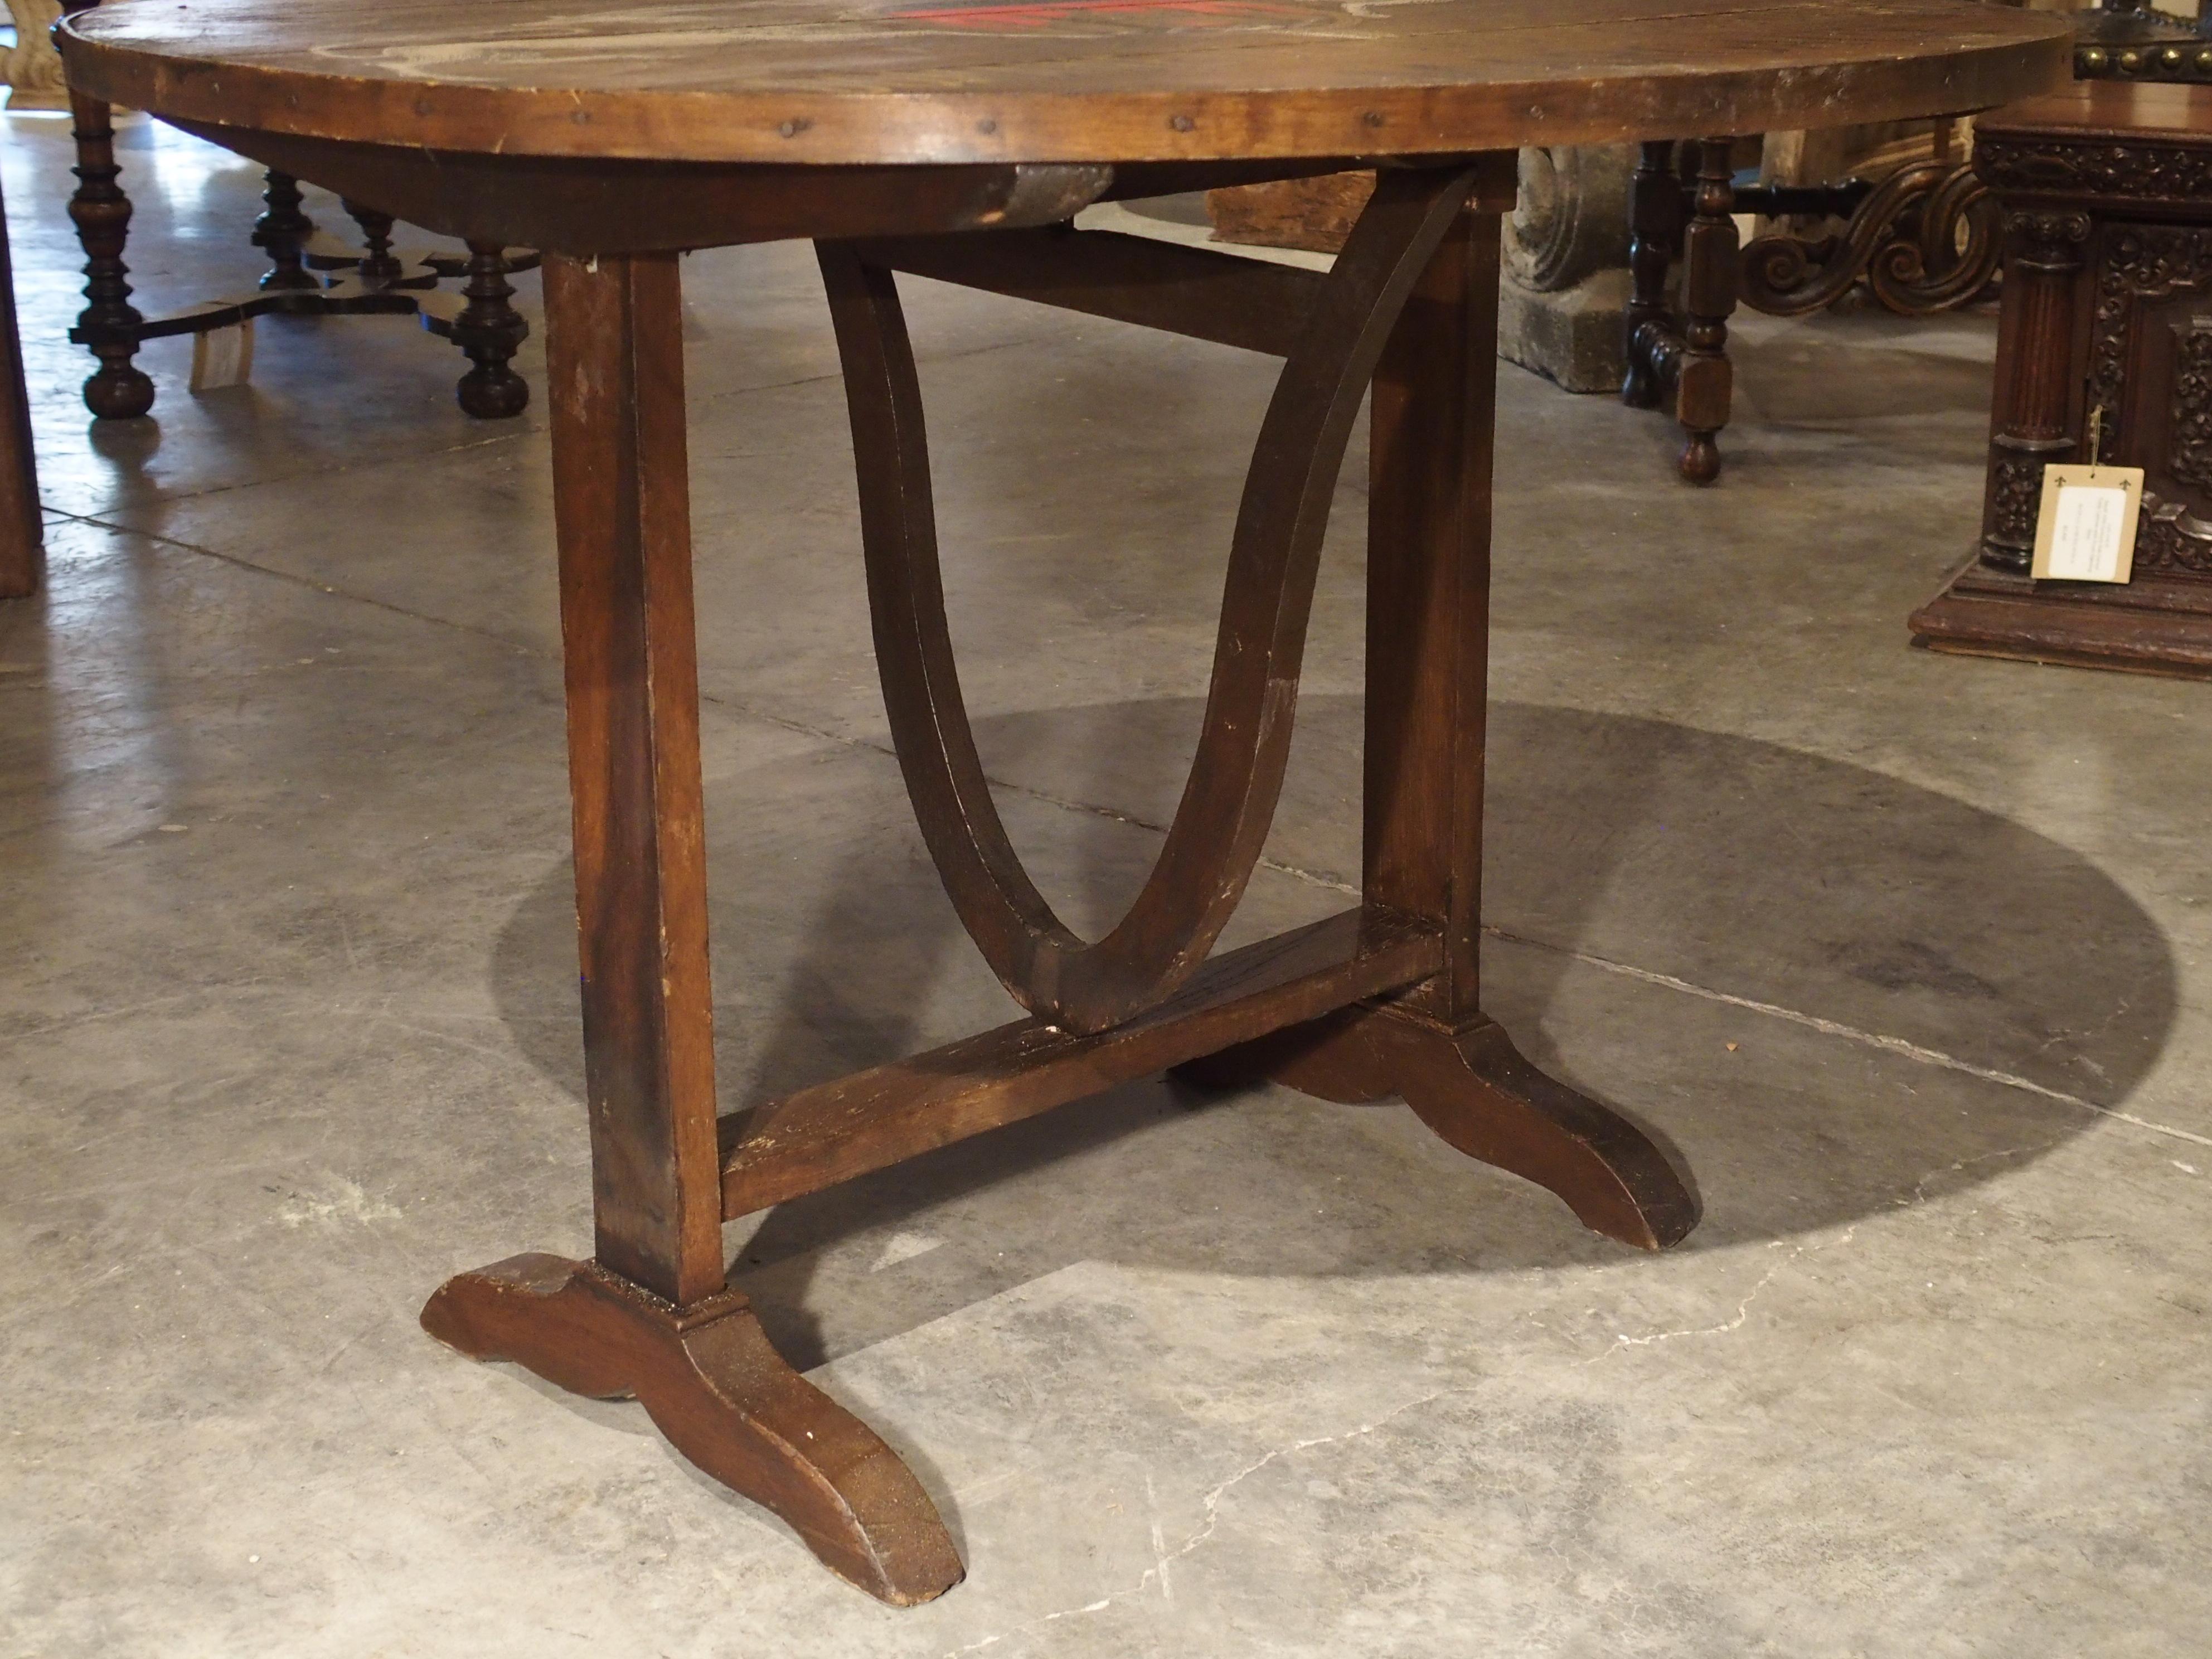 From circa 1900, this wine tasting table is of typical size and has the circular shape of other French tasting tables. However, later in the 20th century, its tilt top was wonderfully painted to depict the colorful crest of the French vineyard, Haut